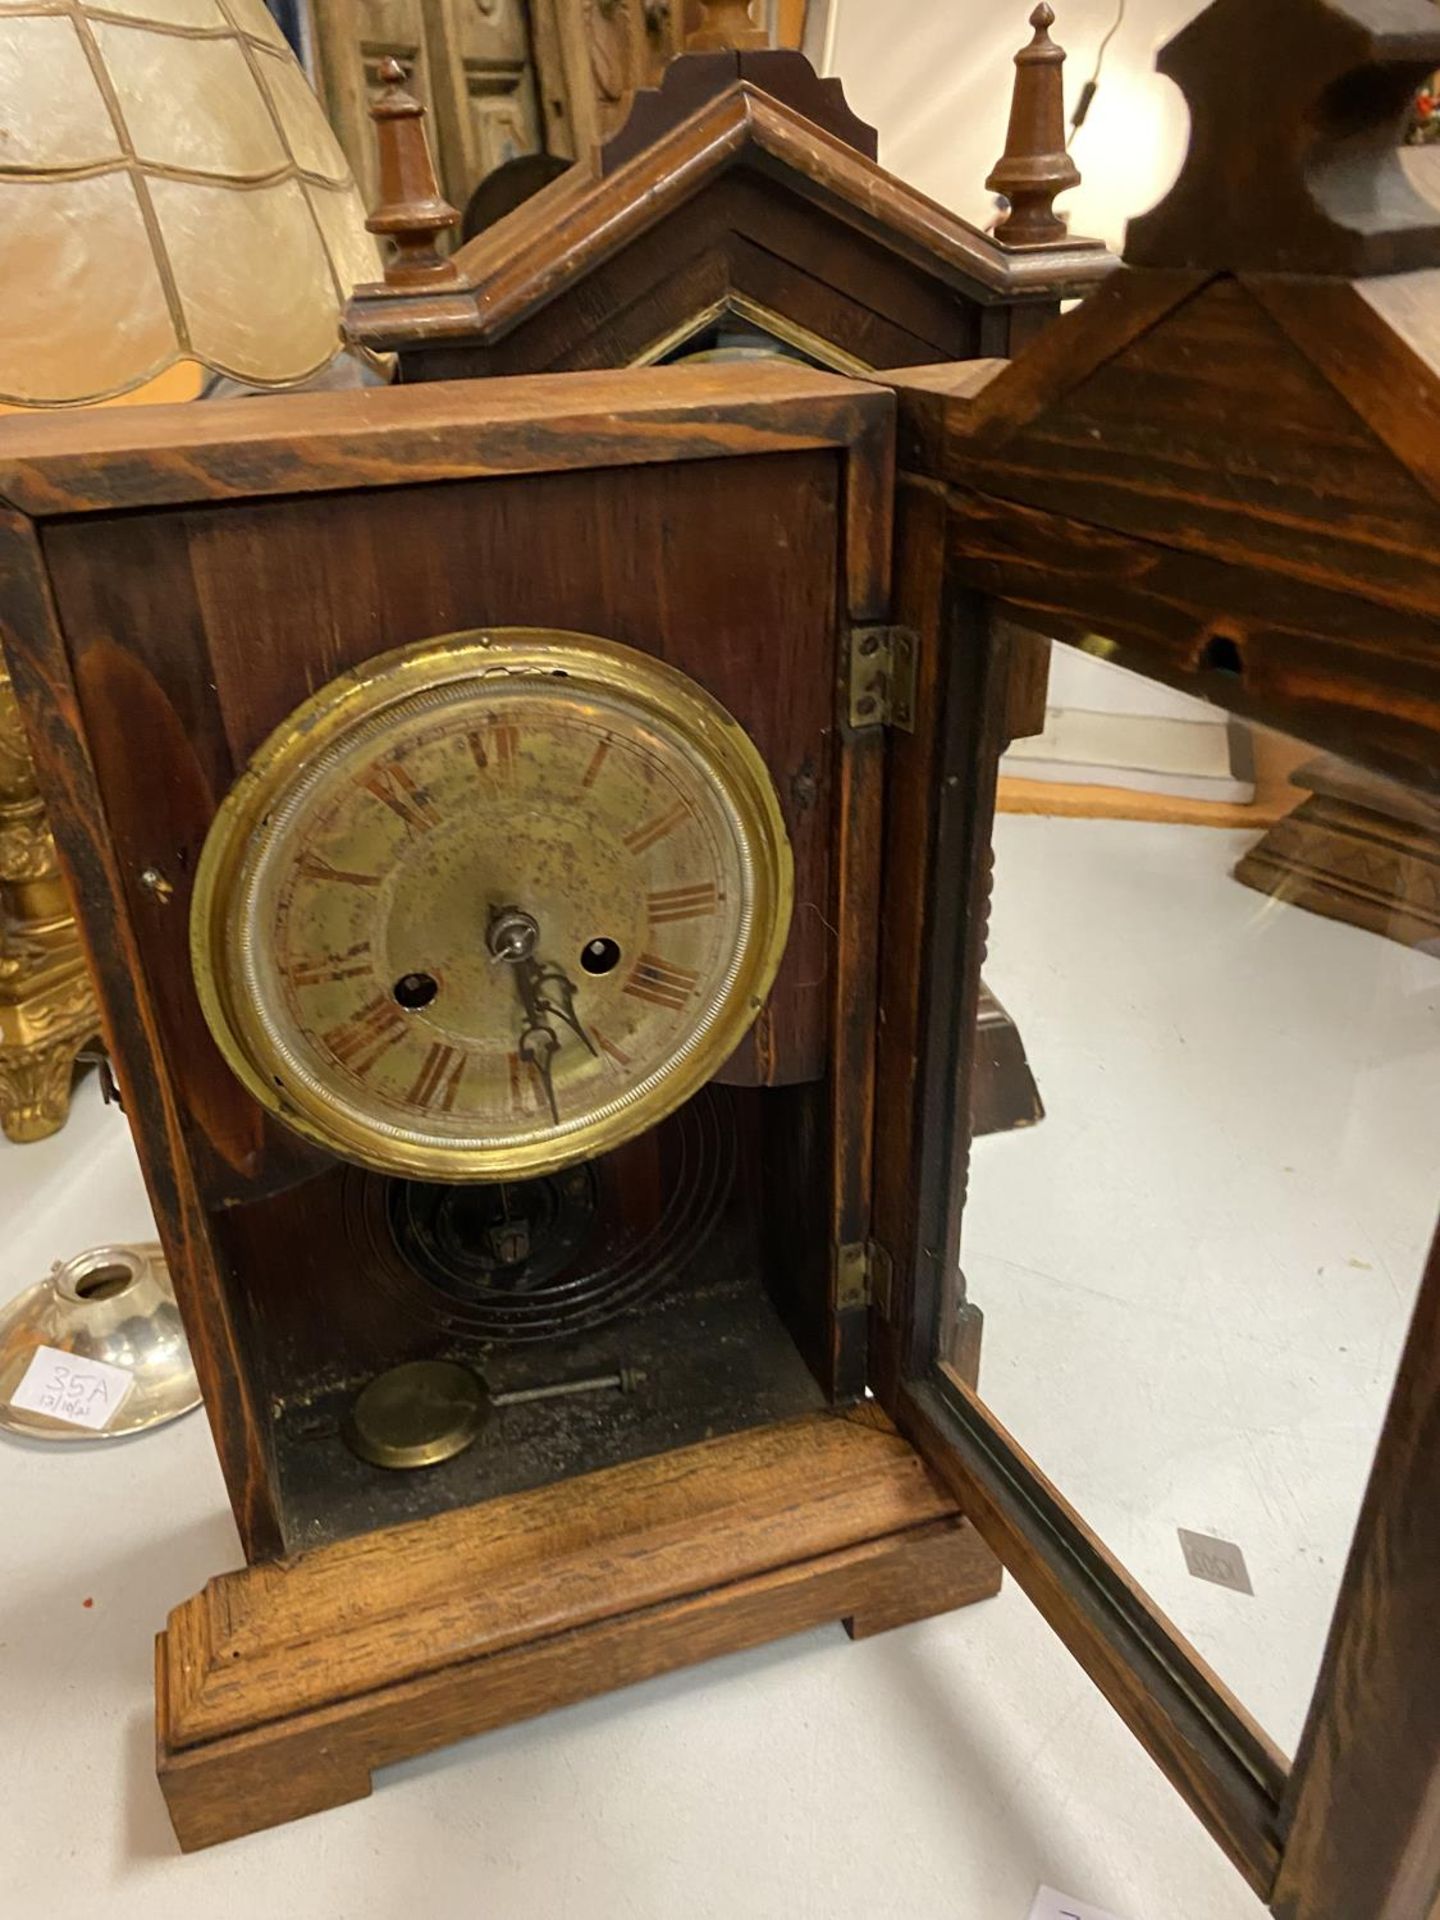 A VINTAGE AMERICAN WOODEN CASE CLOCK WITH A FRONT OPENING FACE - Image 2 of 3